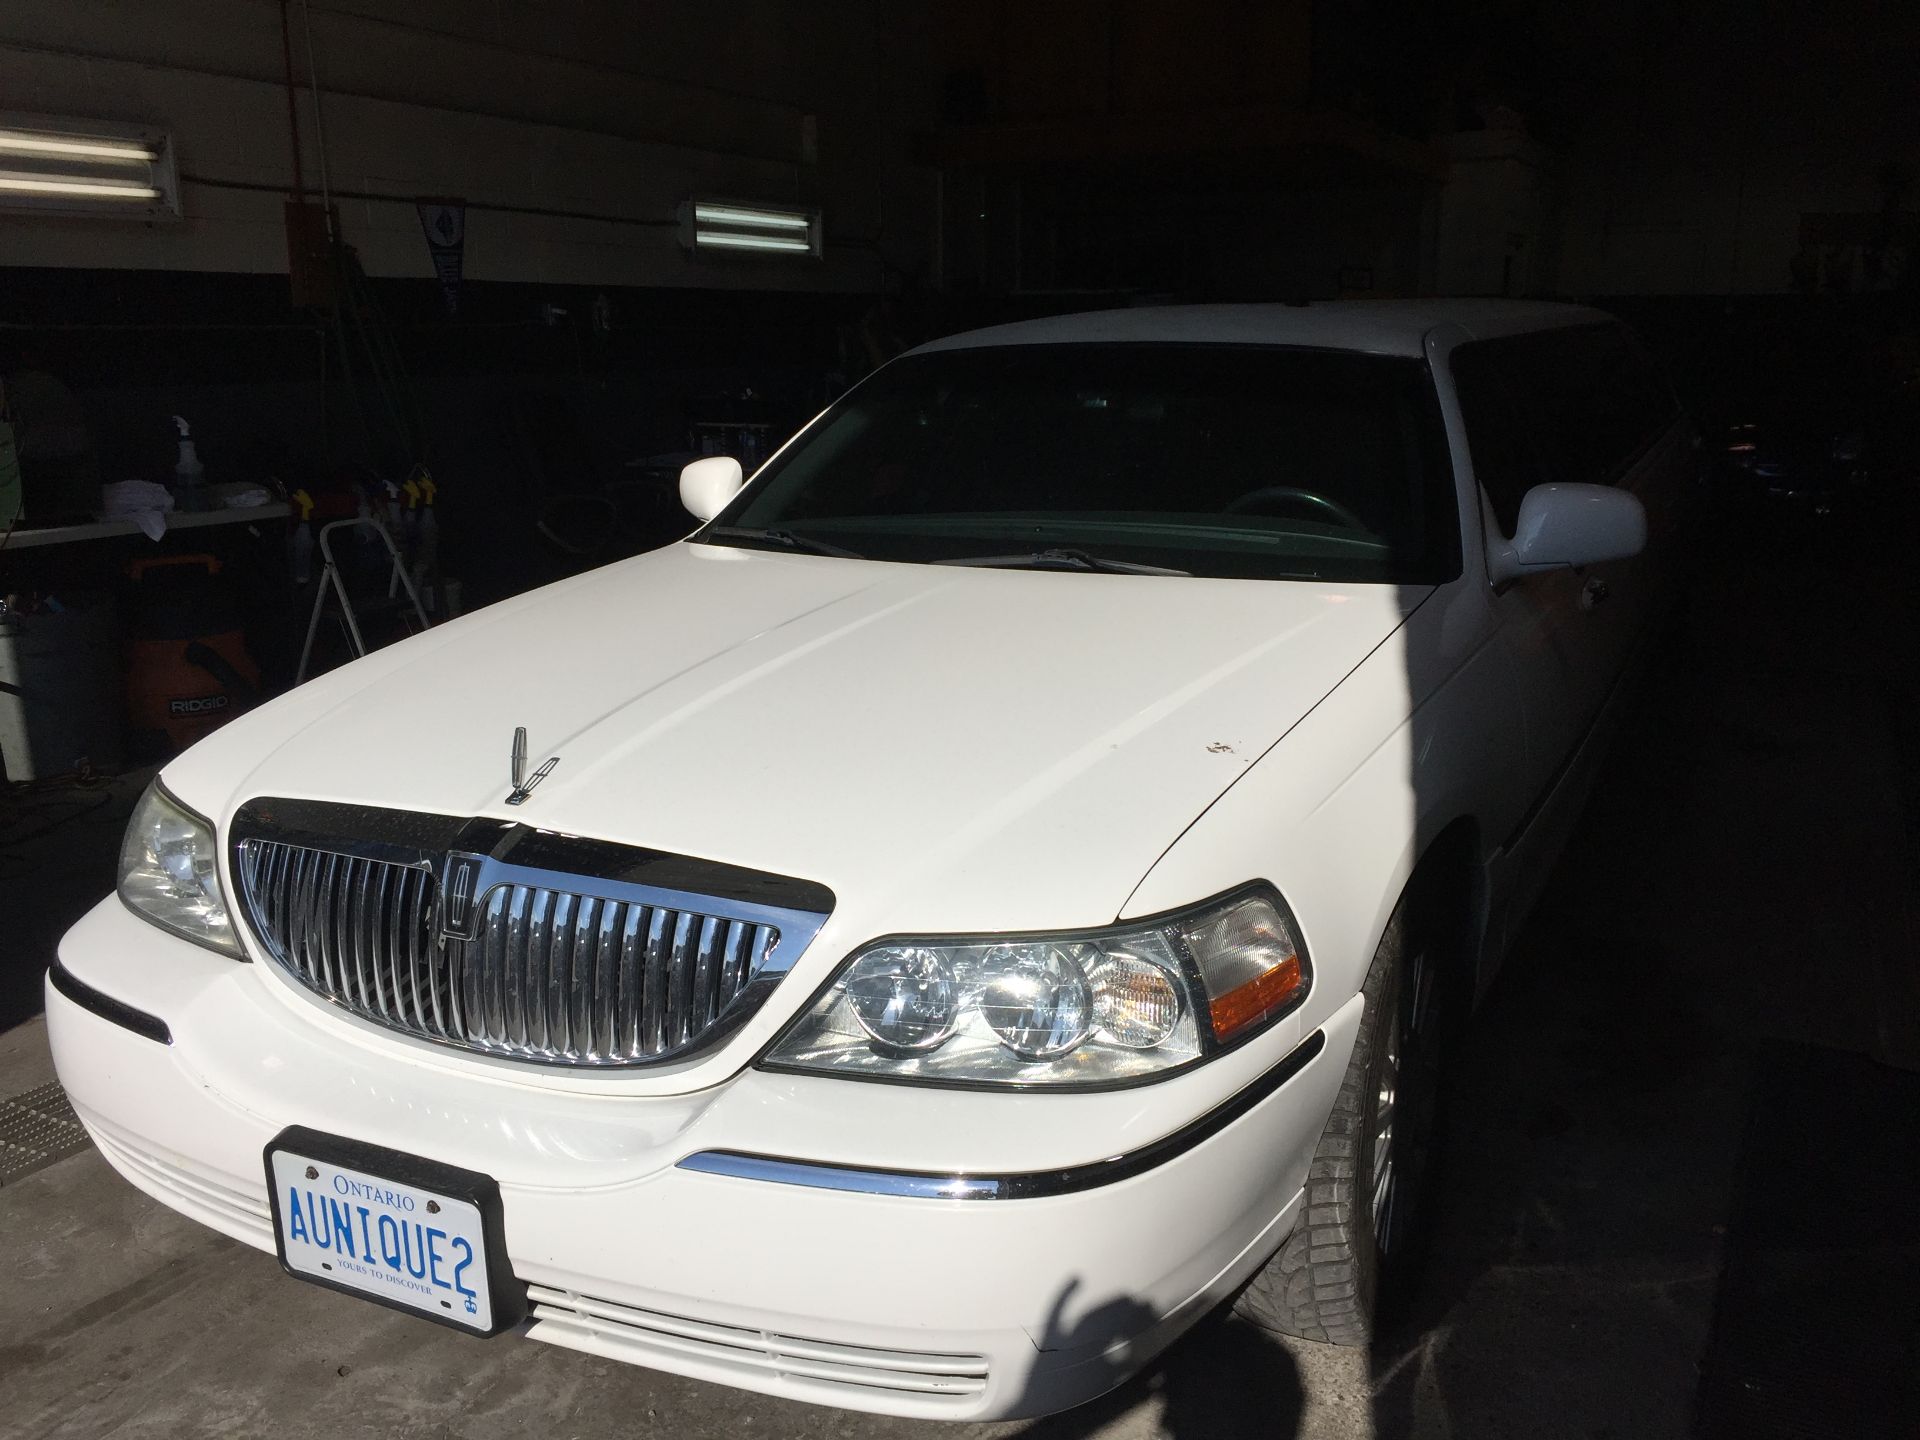 2007 Lincoln Town Car Stretch - 10 Passenger by Executive Coach - 58,600 Miles - Image 2 of 10